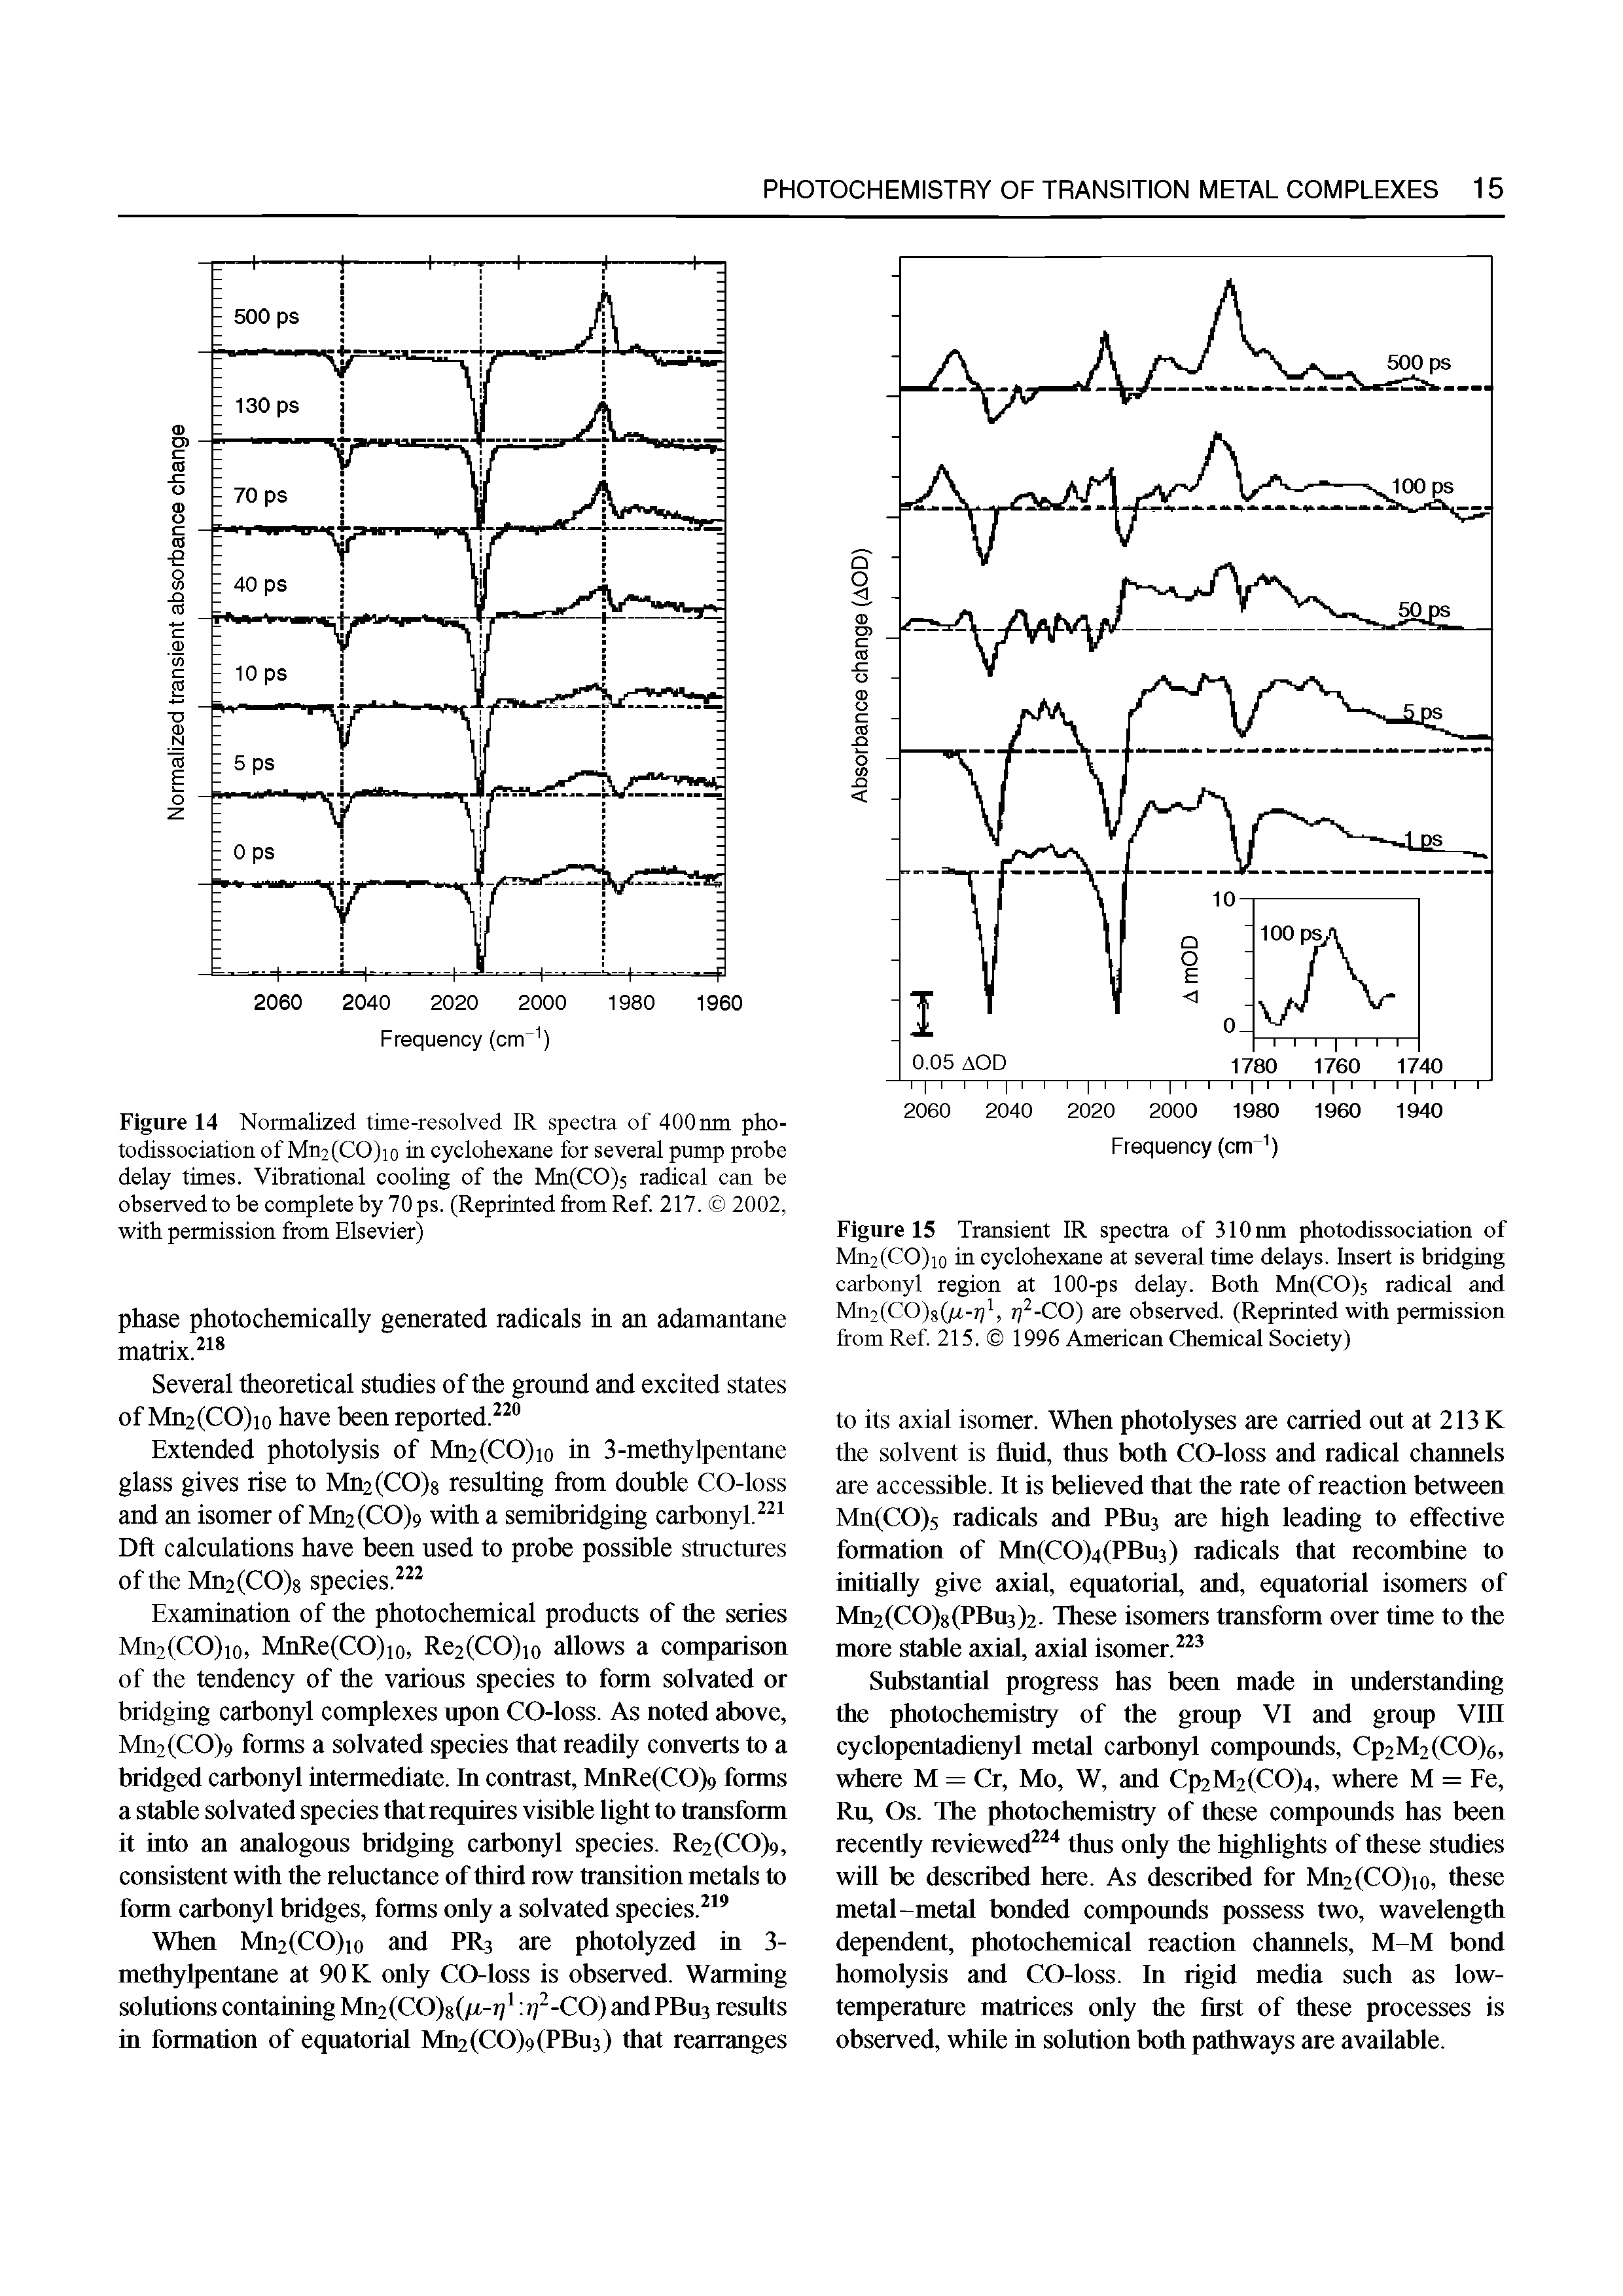 Figure 14 Normalized time-resolved IR spectra of 400 rnn photodissociation of Mn2(CO)io in cyclohexane for several pump probe delay times. Vibrational cooling of the Mn(CO)5 radical can be observed to be complete by 70 ps. (Reprinted from Ref. 217. 2002, with permission from Elsevier)...